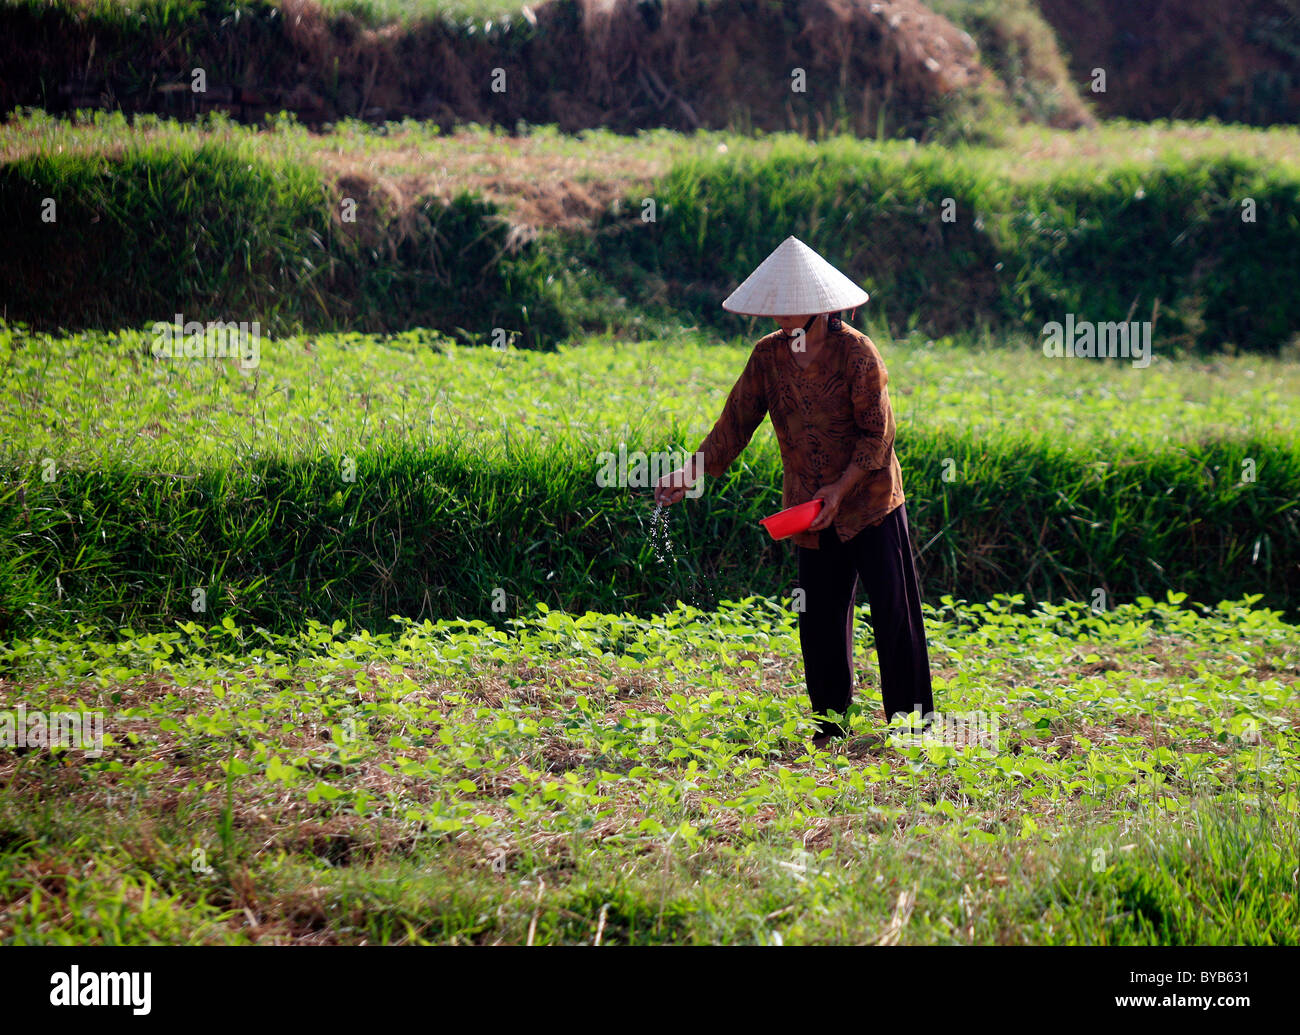 Person working in a field, Vietnam, Asia Stock Photo